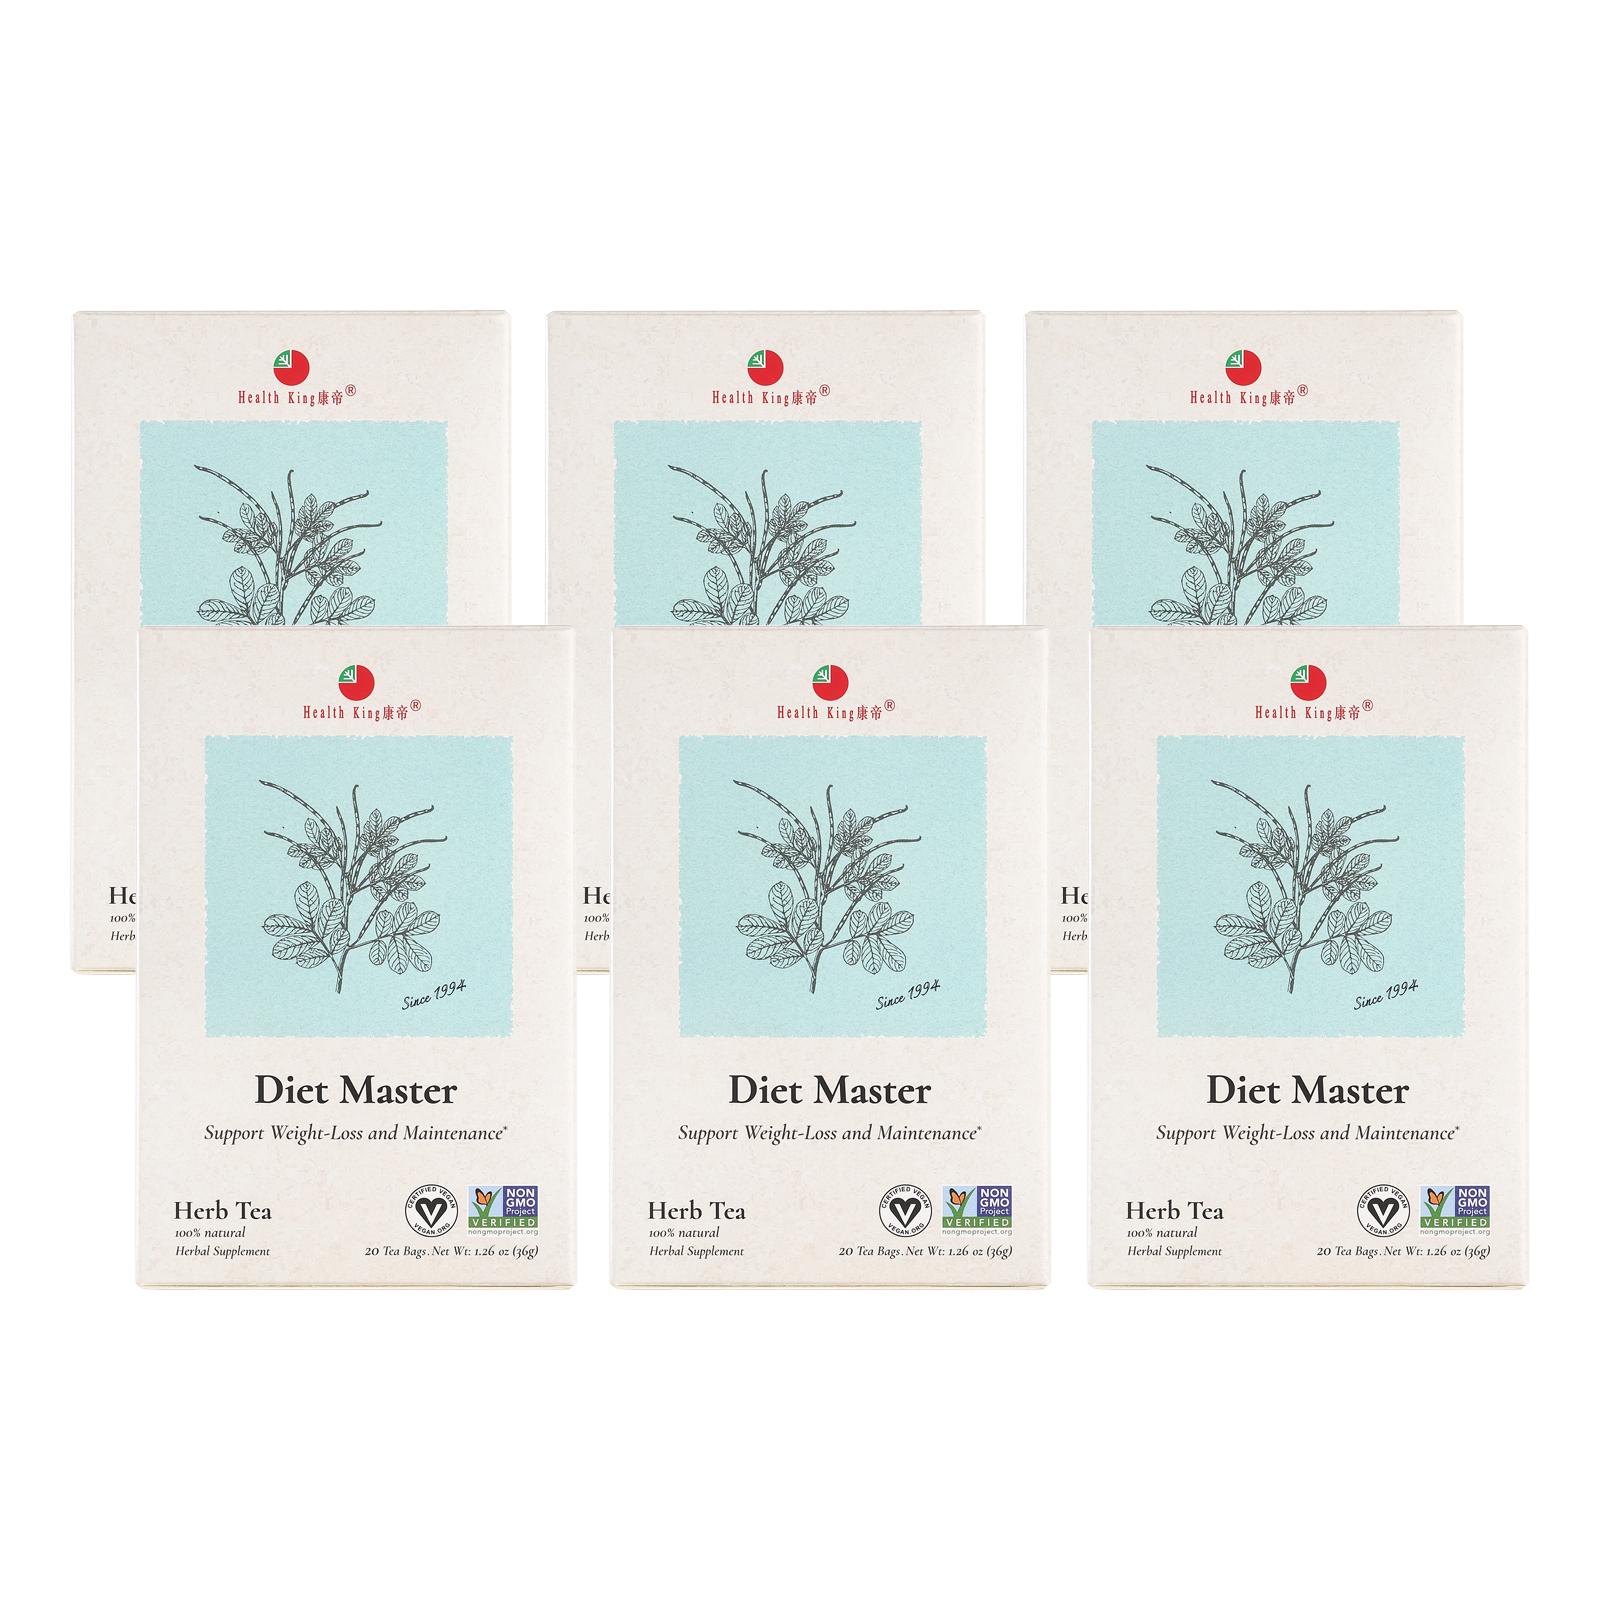 Six packets of Diet Master Herb Tea with a decorative leaf